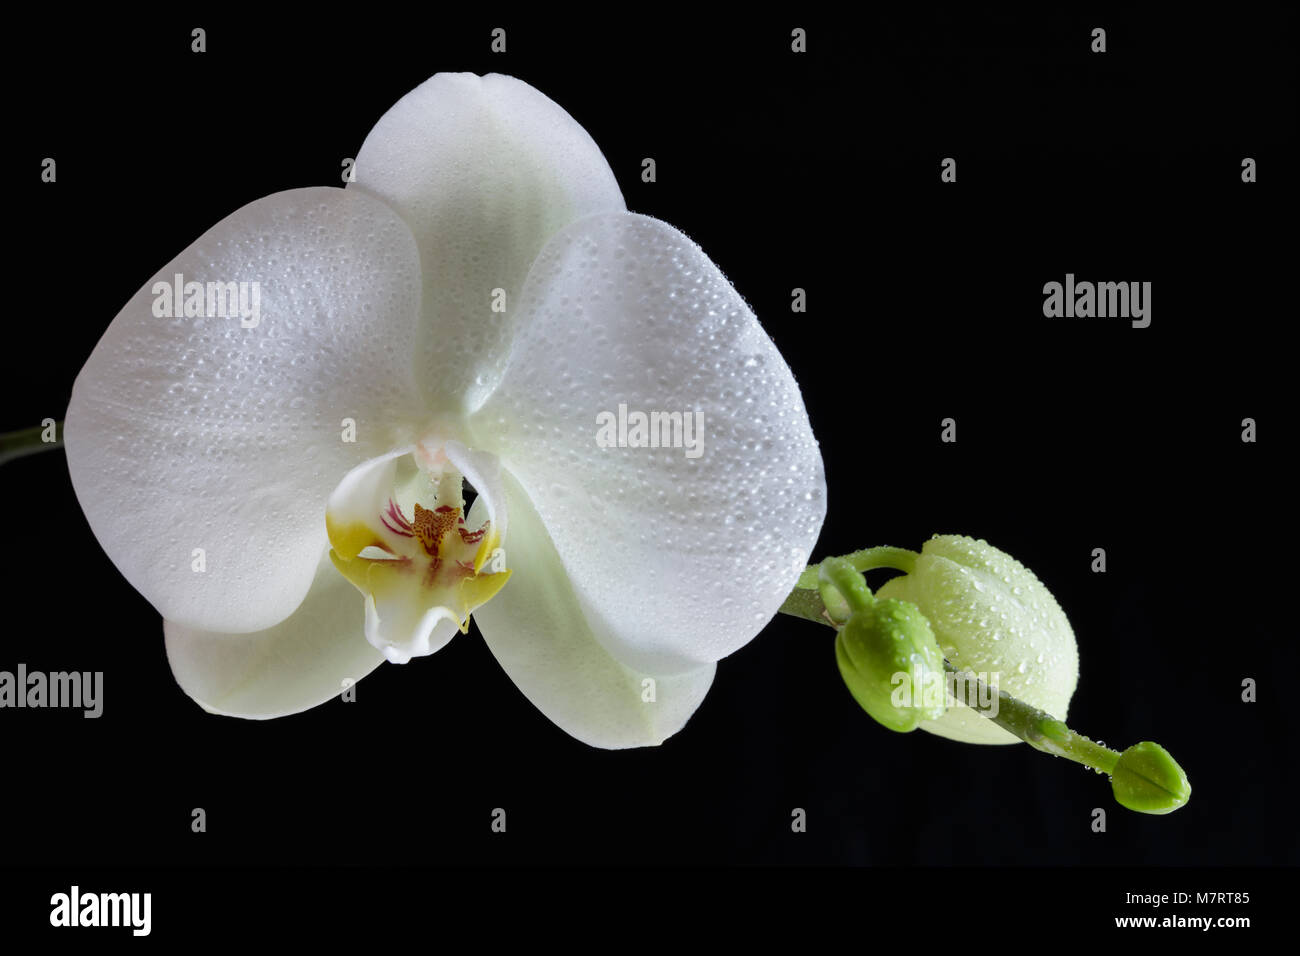 White orchid flower and buds against a clean black background Stock Photo